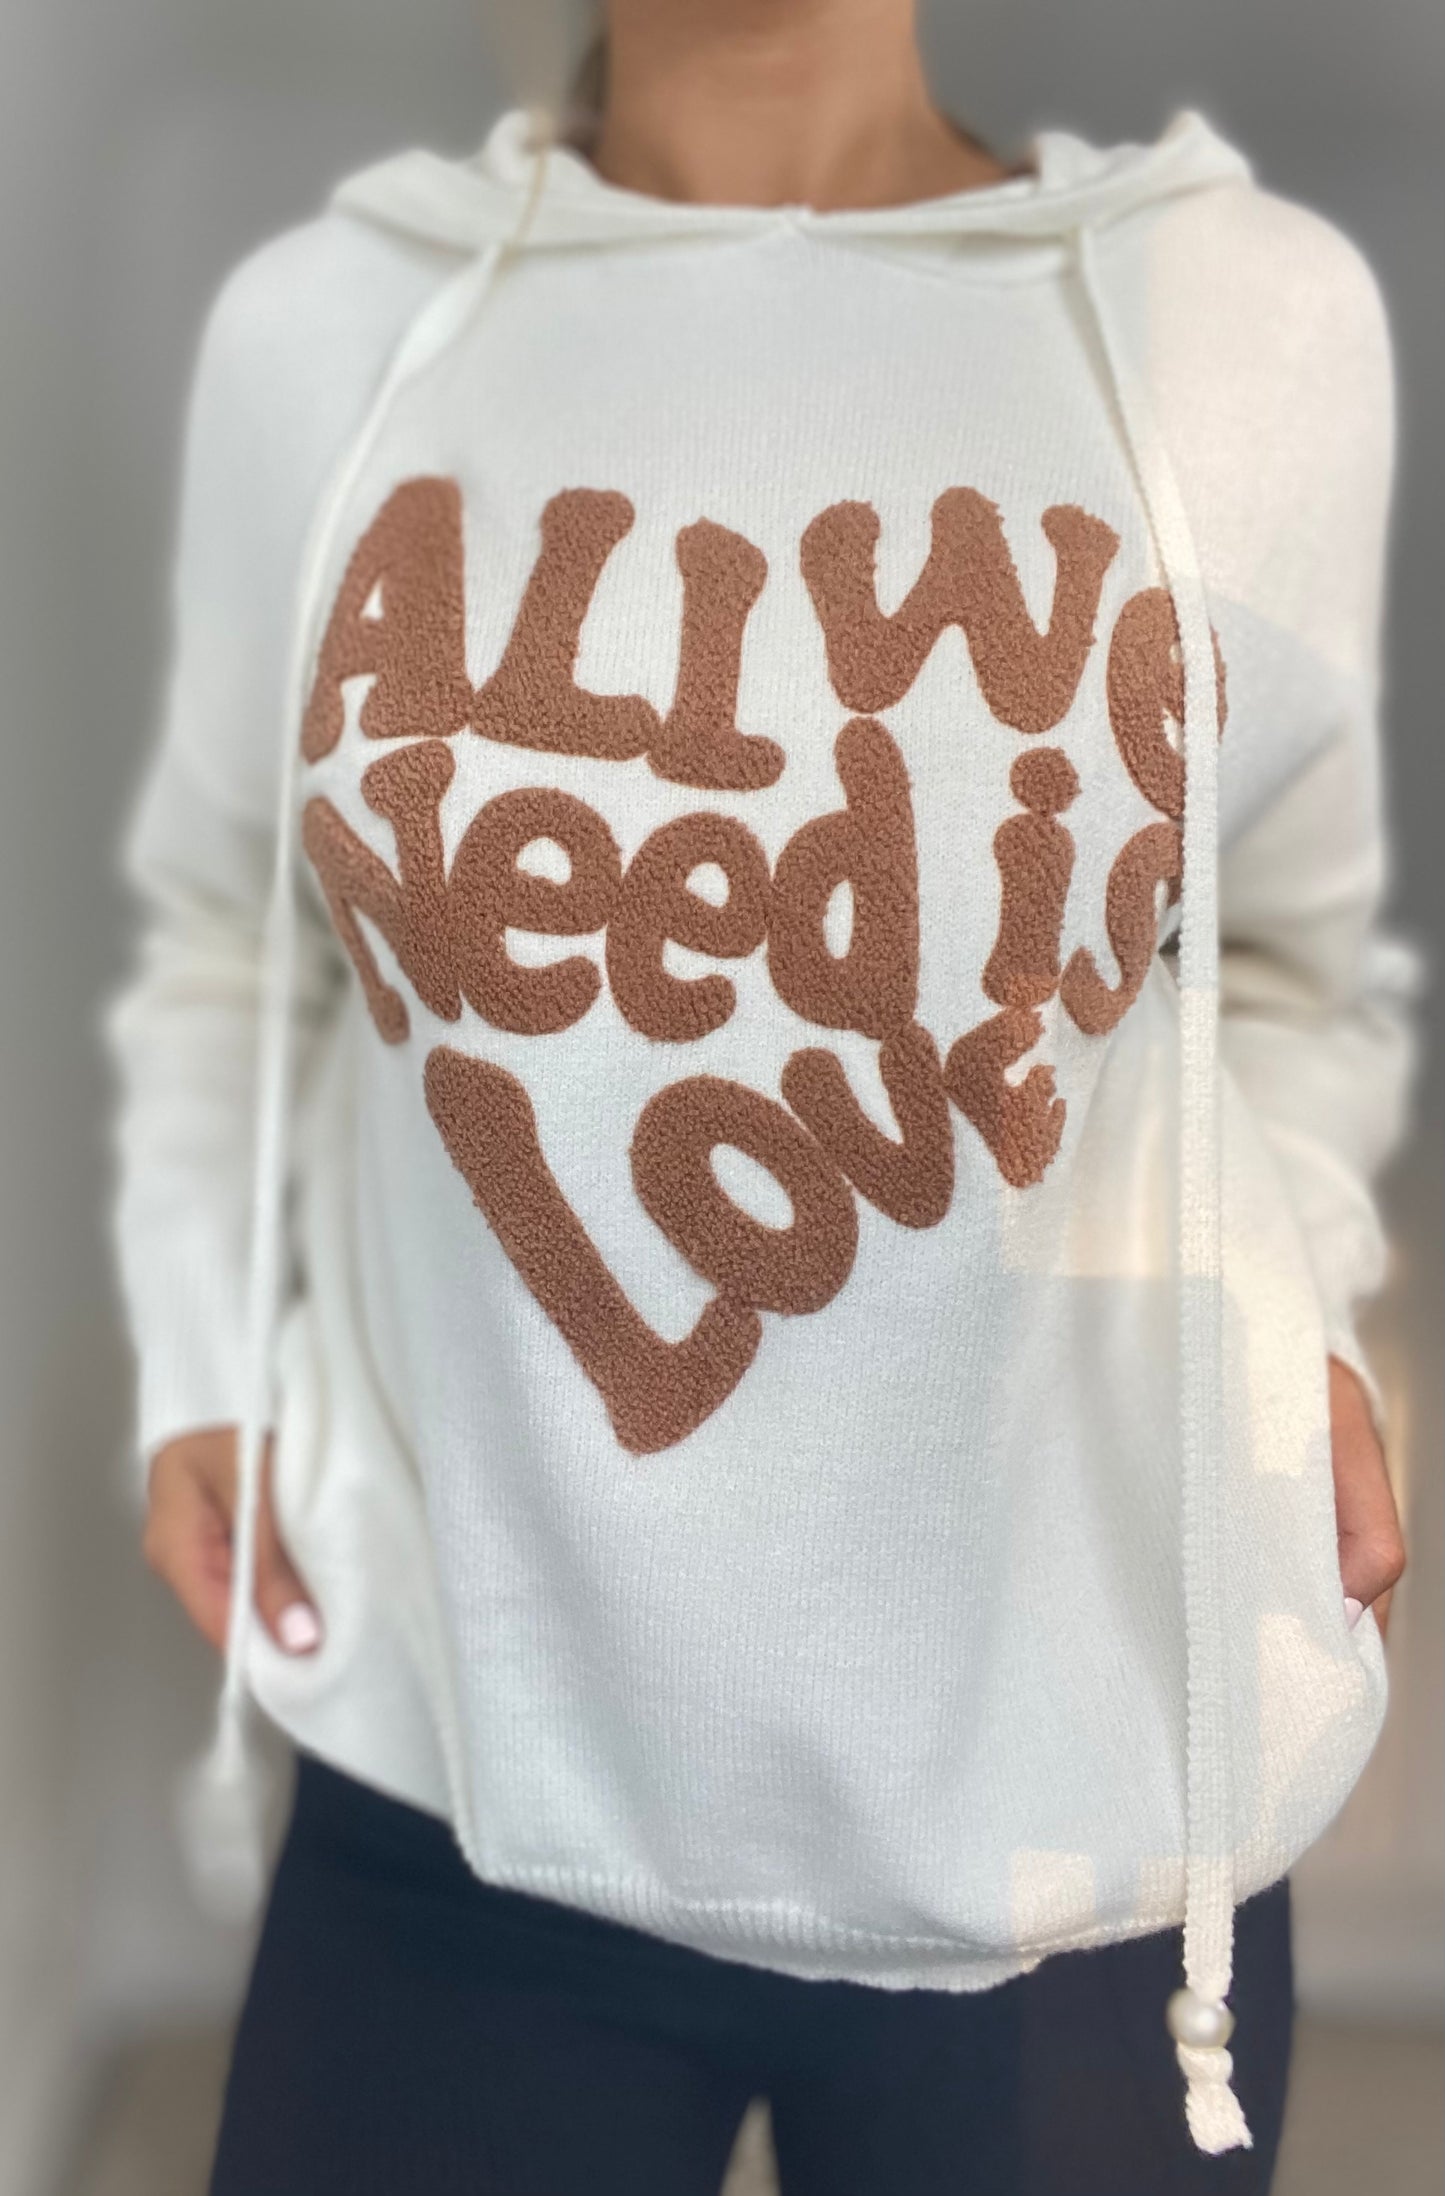 "All We Need is Love" Knit Jumper